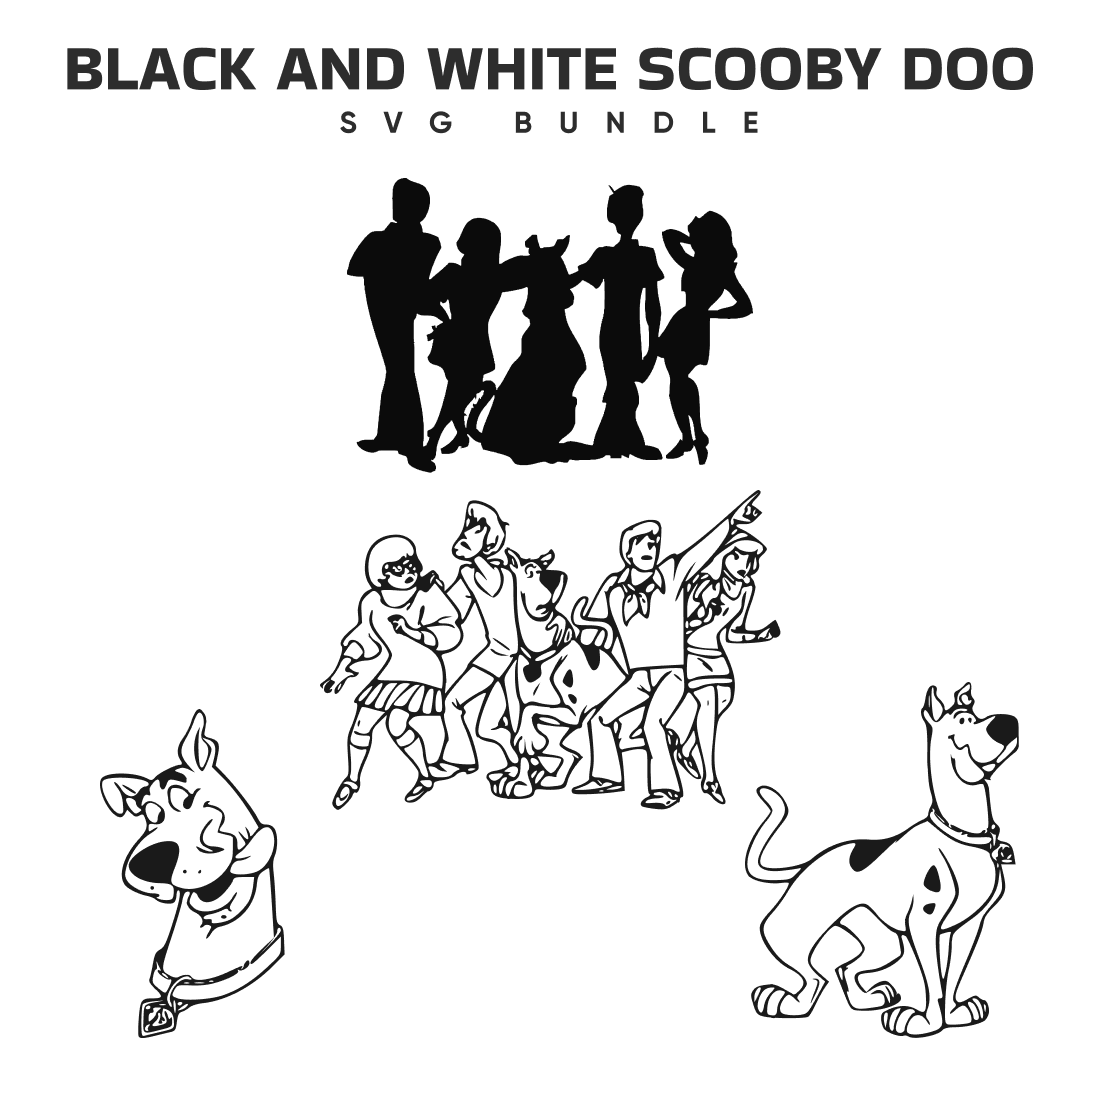 black and white scooby doo svg.